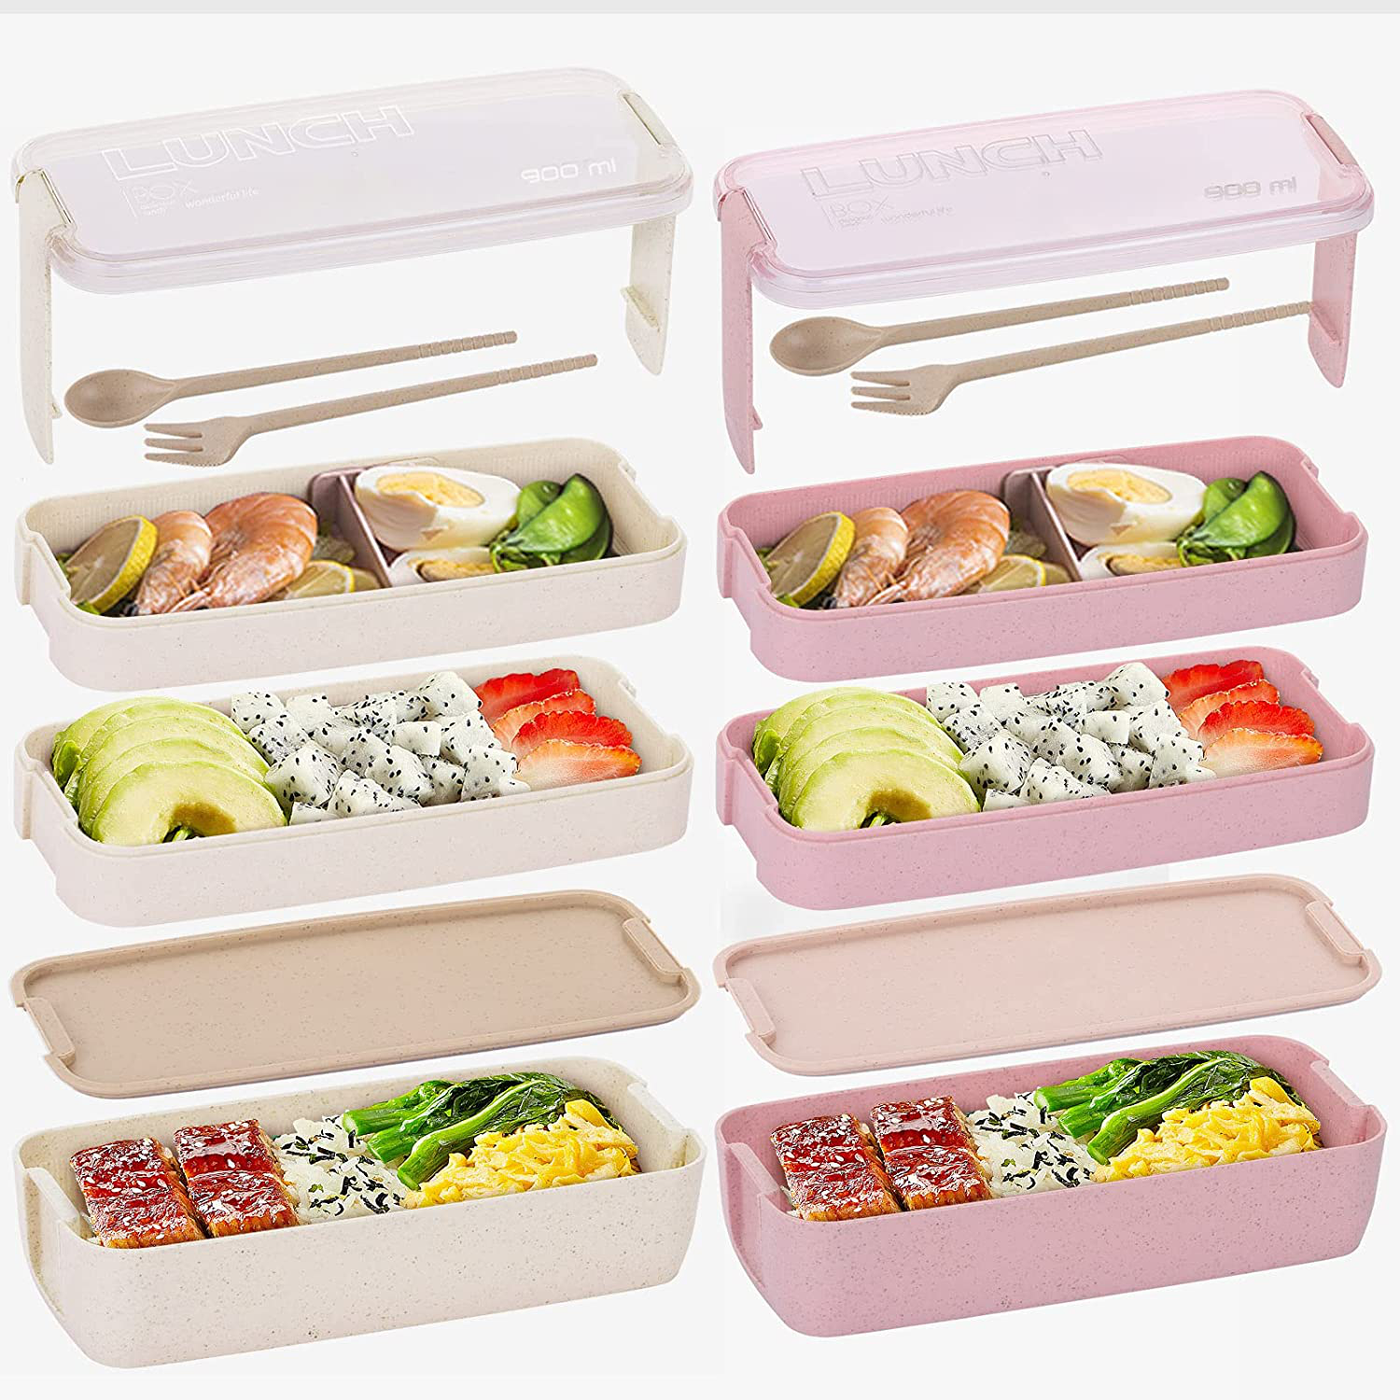 Bento Box for Kids Lunch Boxes Adults 3-In-1 Meal Prep Container, 900ML Janpanese Lunch Box with Compartment, Wheat Straw, Leak-proof, Spoon & Fork BPA-free - Beige+Pink